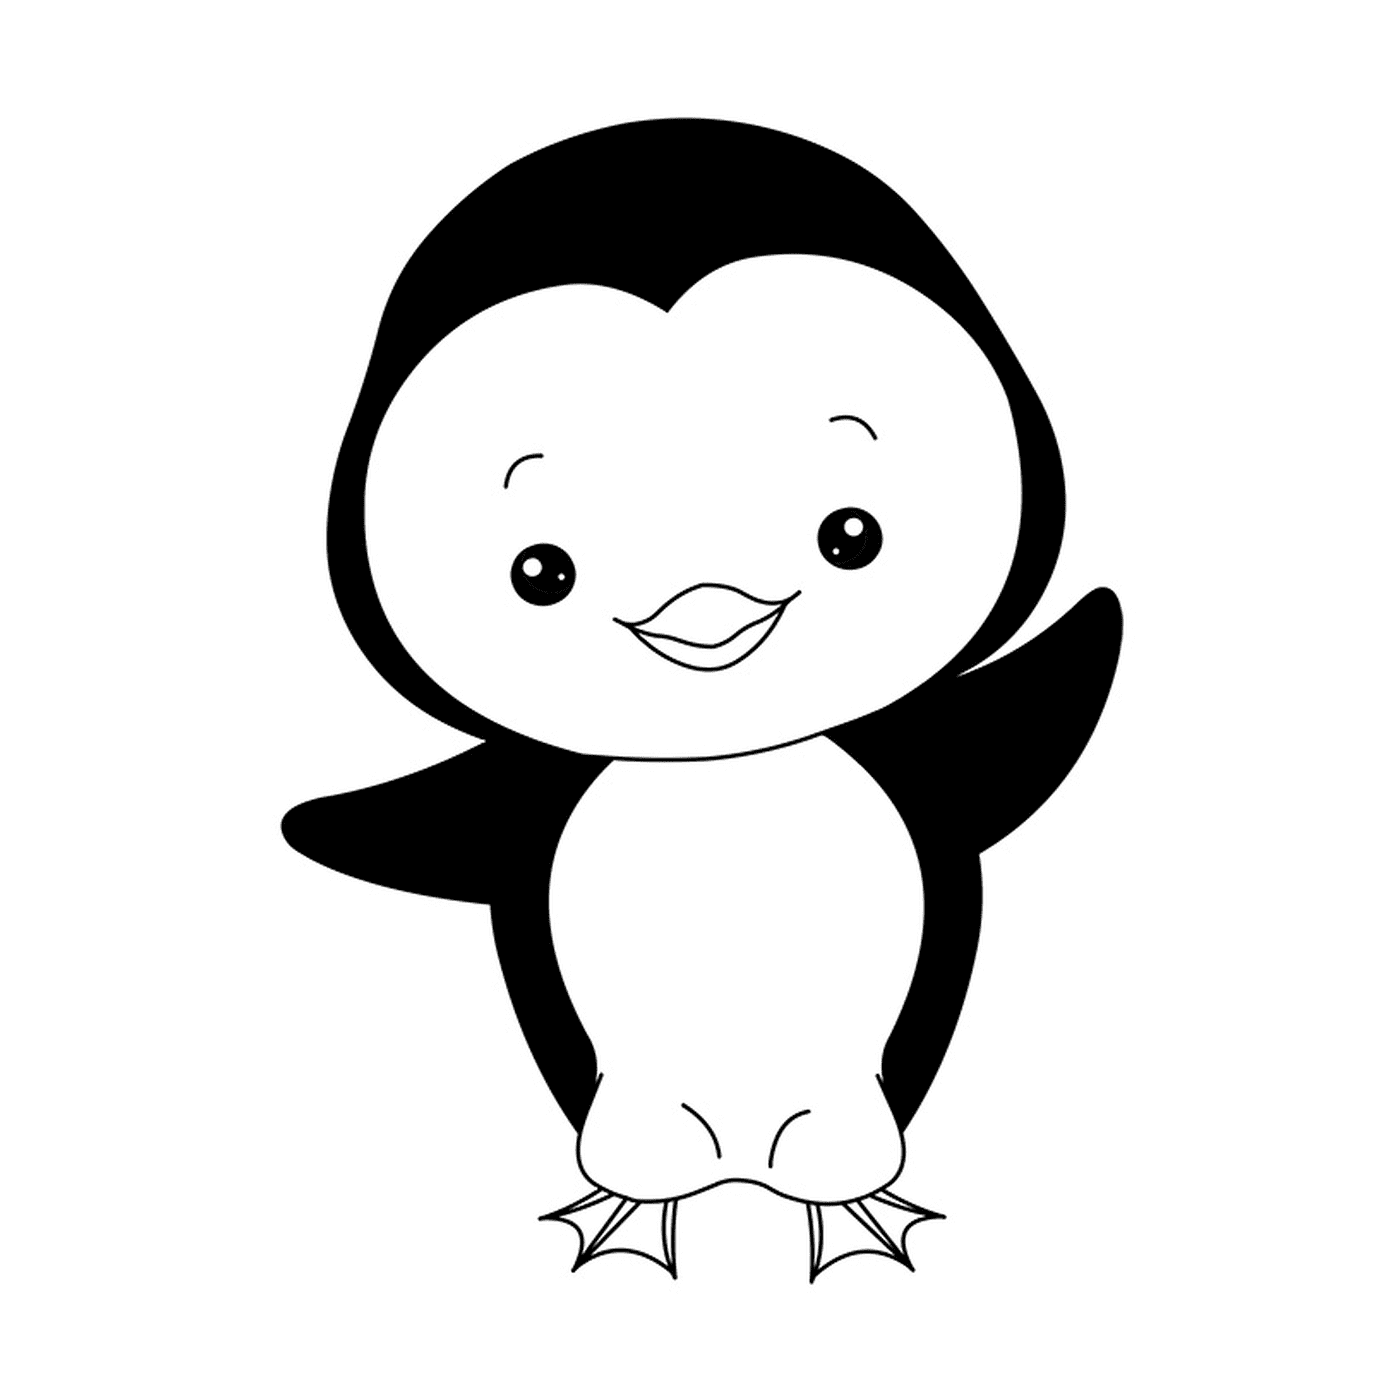  Image of a baby penguin 